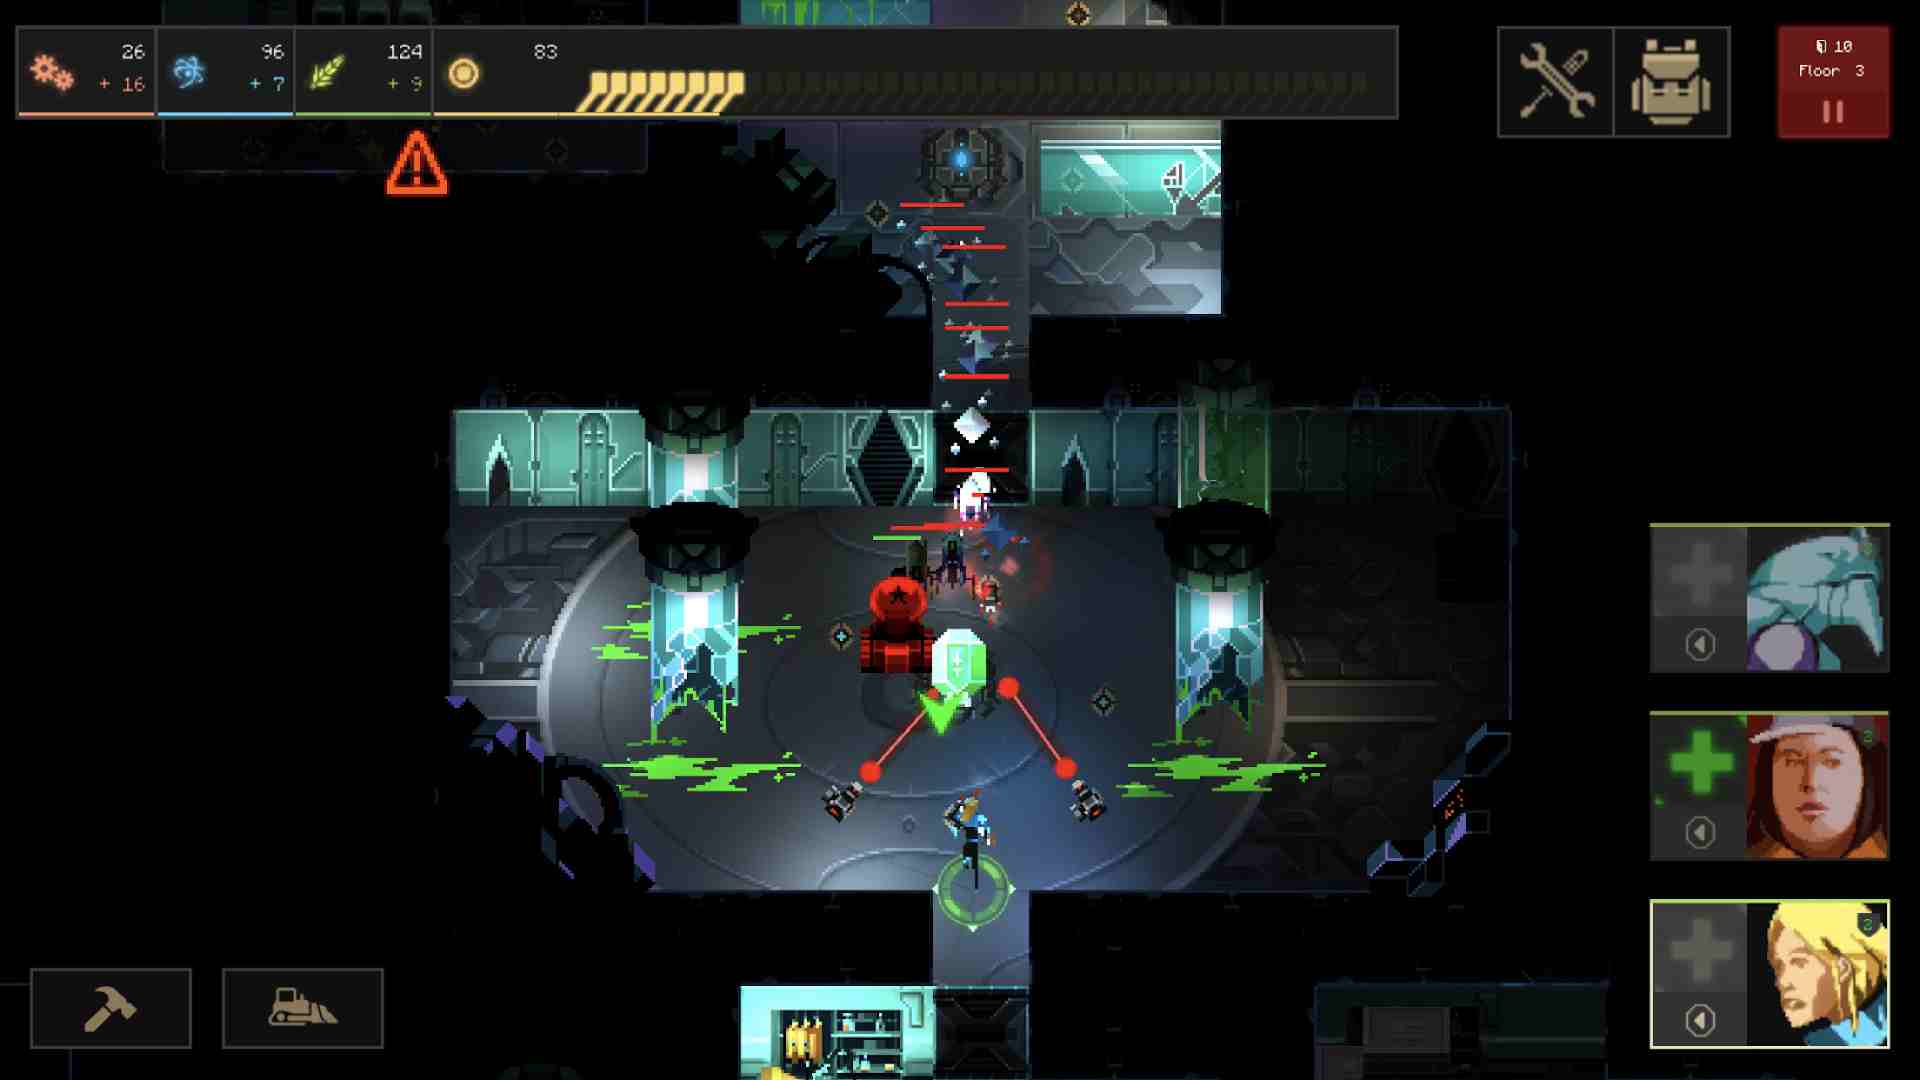 Dungeon of the Endless Apogee mod apk